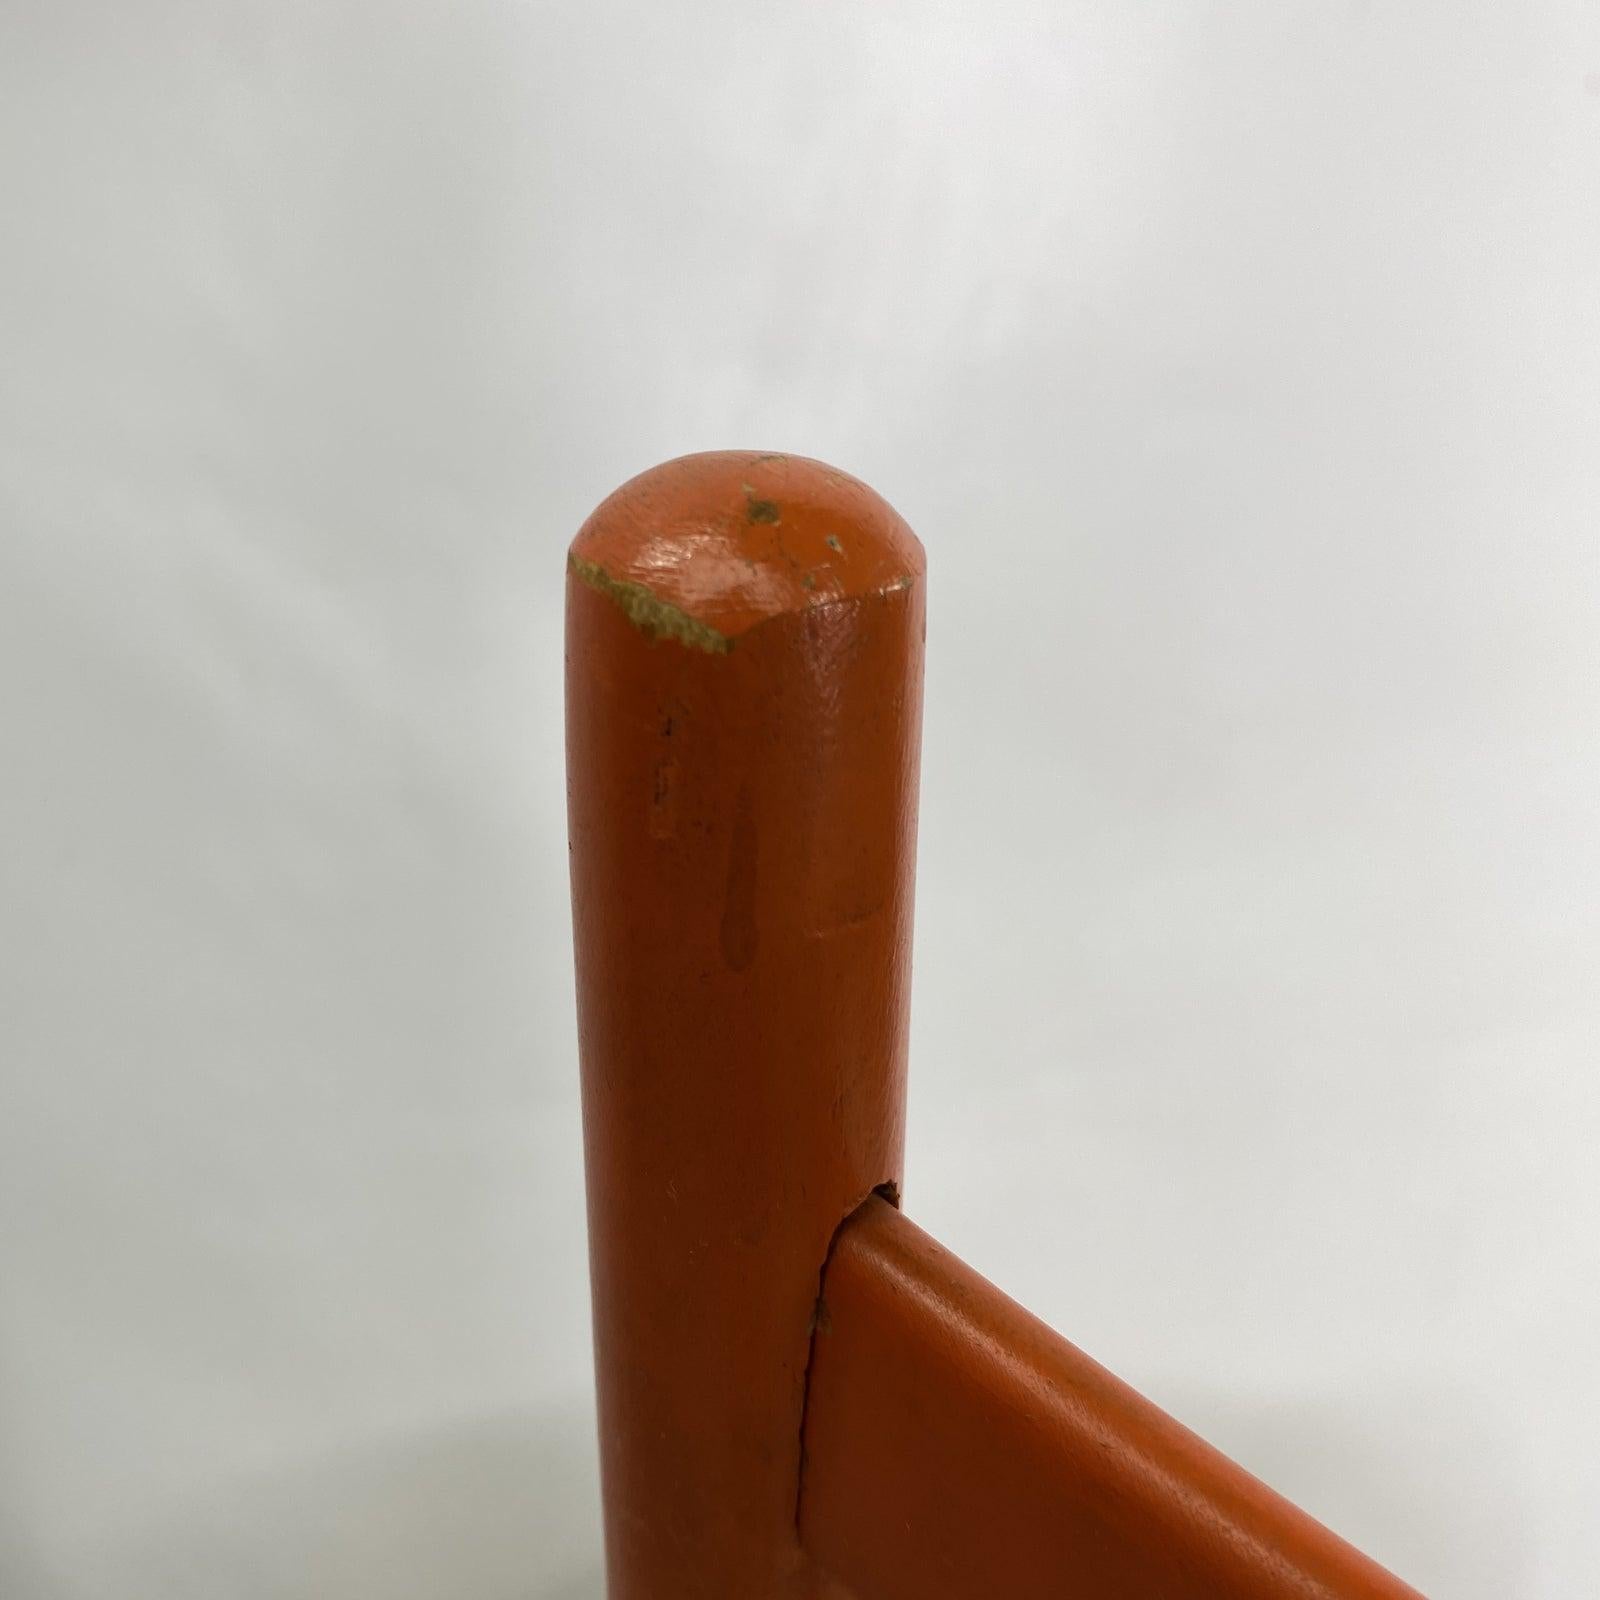 Italian Vintage Gio Ponti Style Orange Chair, Made in Italy For Sale